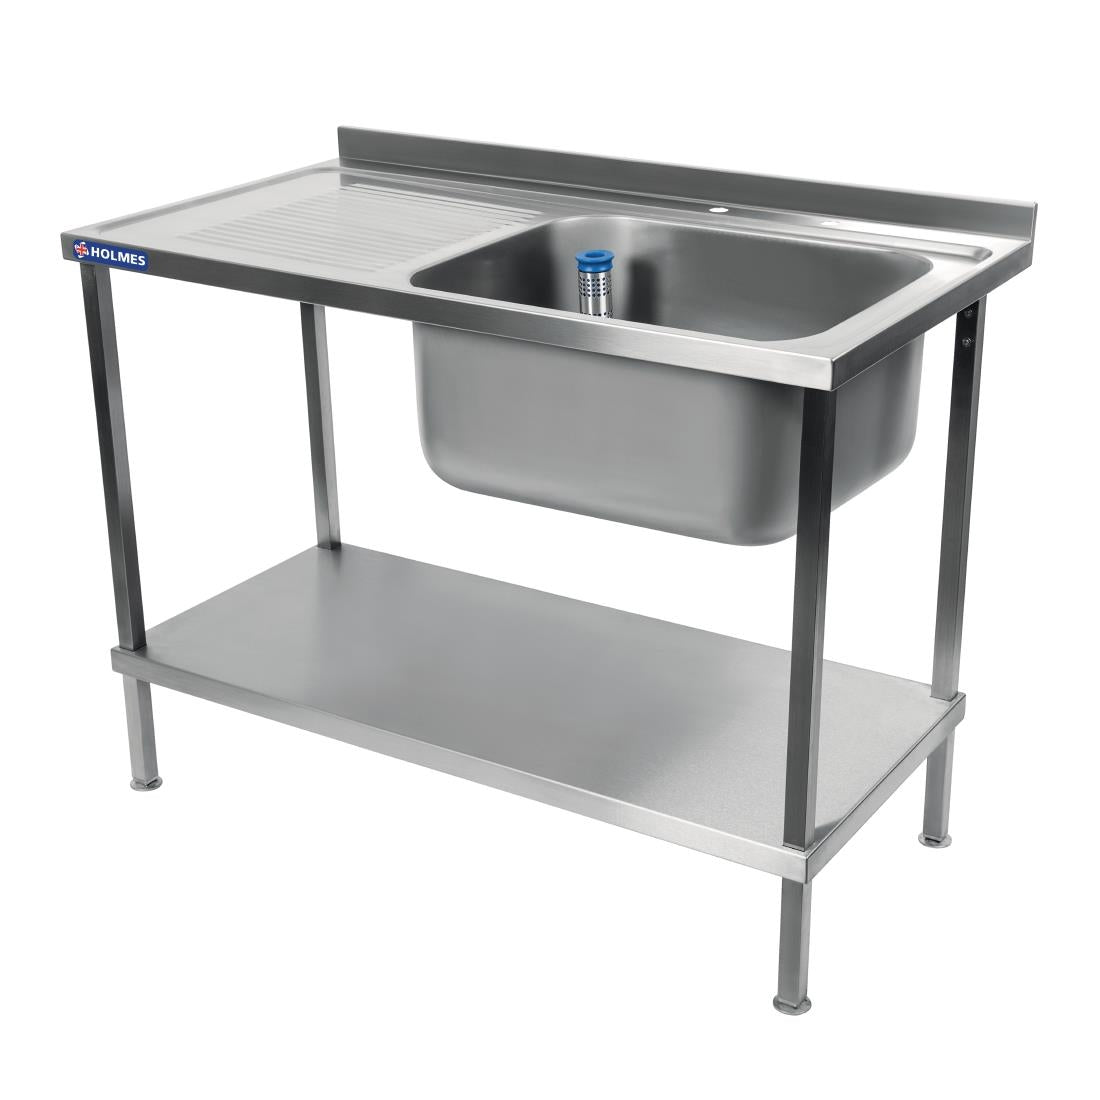 DR060 Holmes Fully Assembled Stainless Steel Sink Left Hand Drainer 1000mm JD Catering Equipment Solutions Ltd